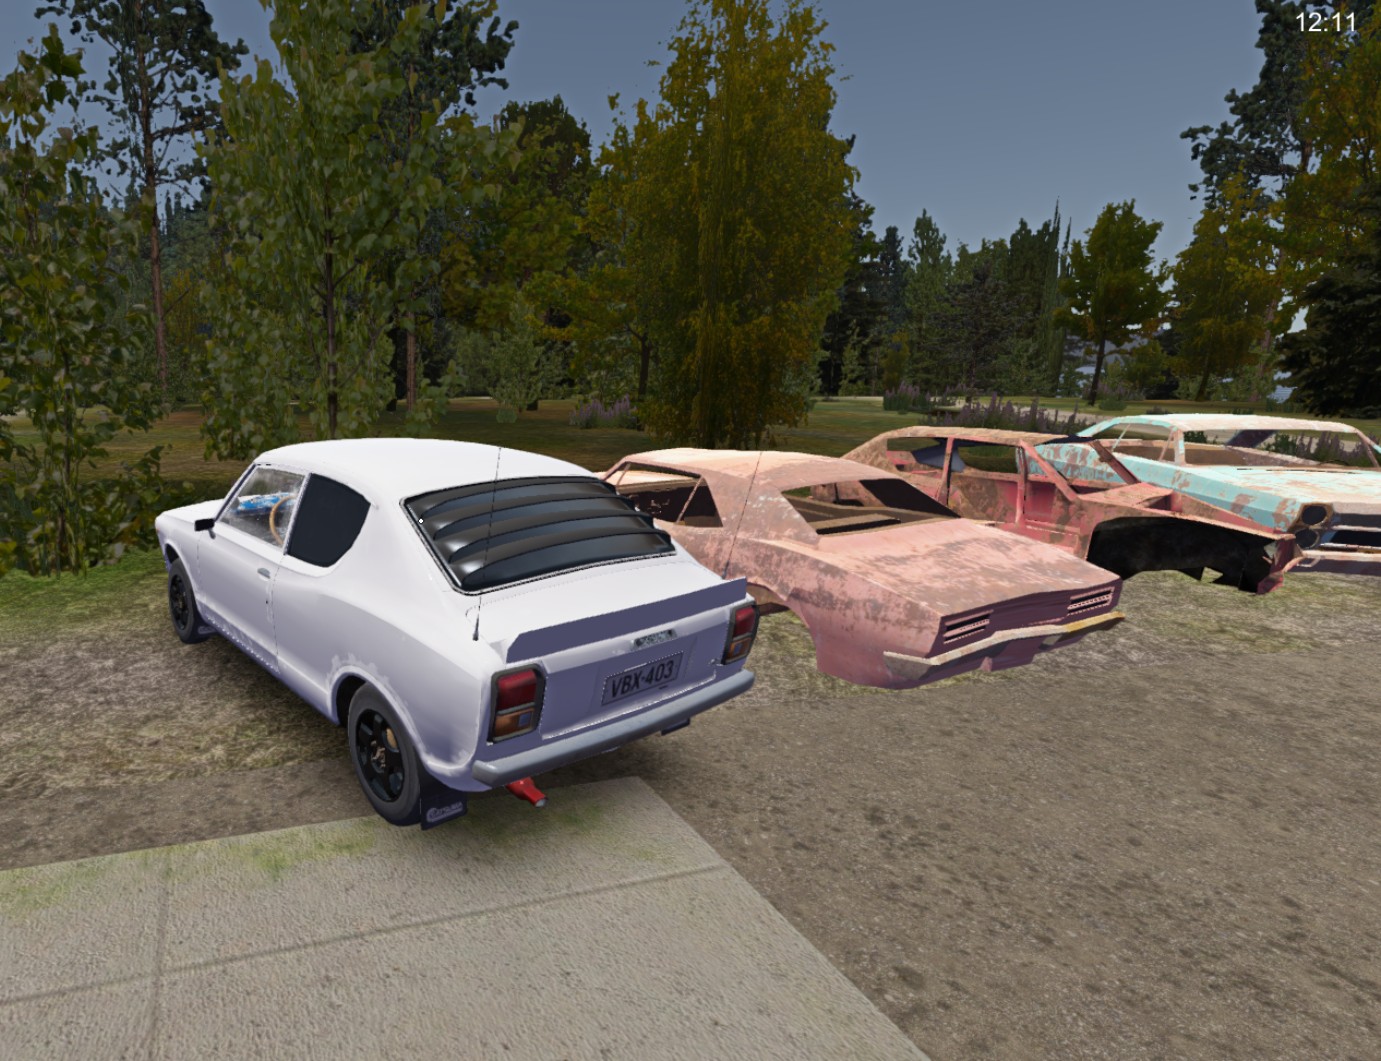 My Summer Car: SaveGame (racing Snow White Satsuma with a bunch of junk)